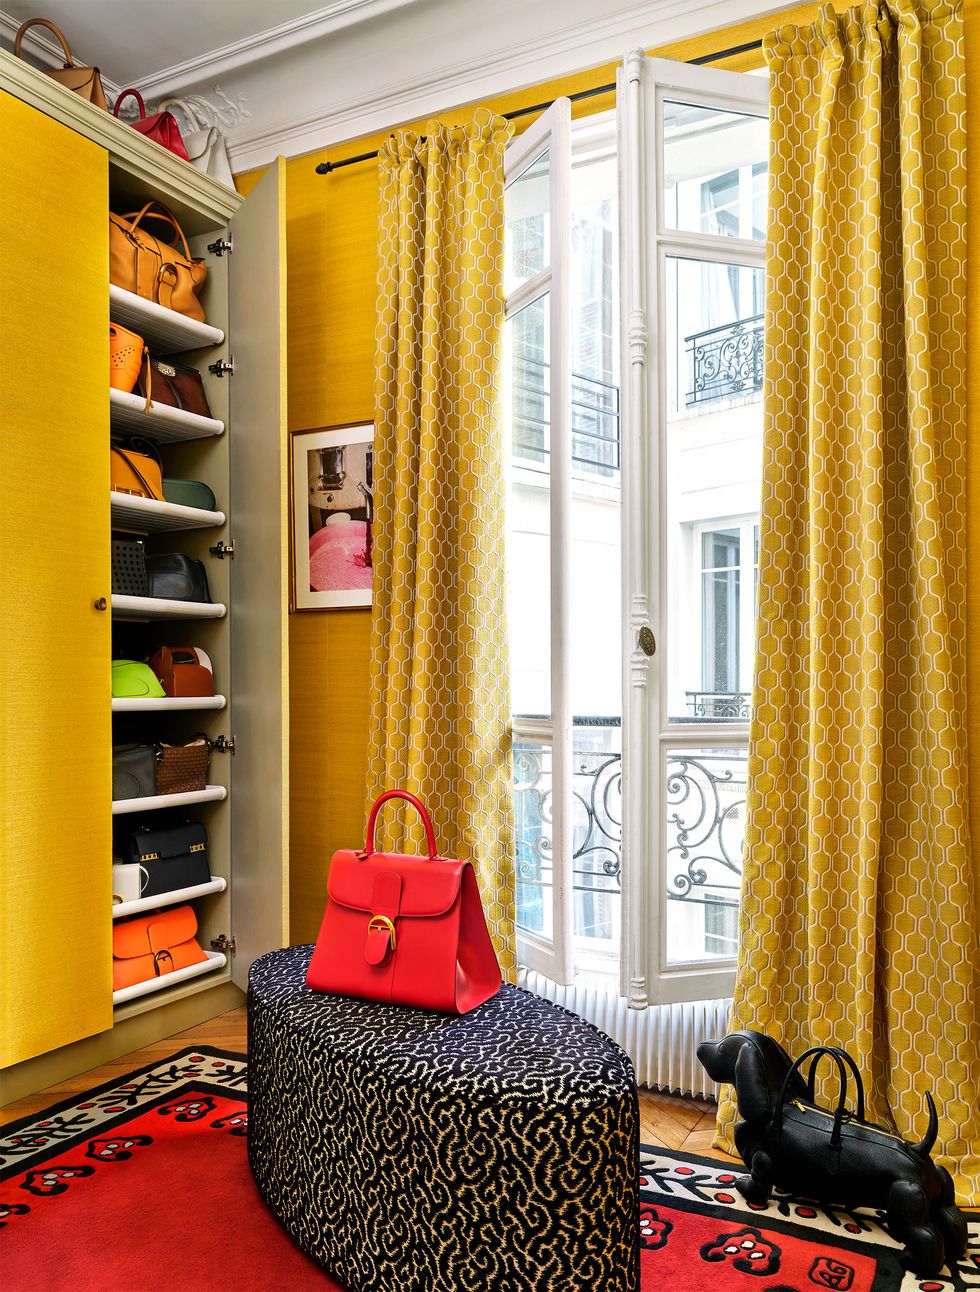 in a yellow dressing room is a large window with yellow curtains, an armoire filled with tens of leather handbags on shelves, patterned oval ottoman with a red bag atop, dog shaped handbag on floor, red rug